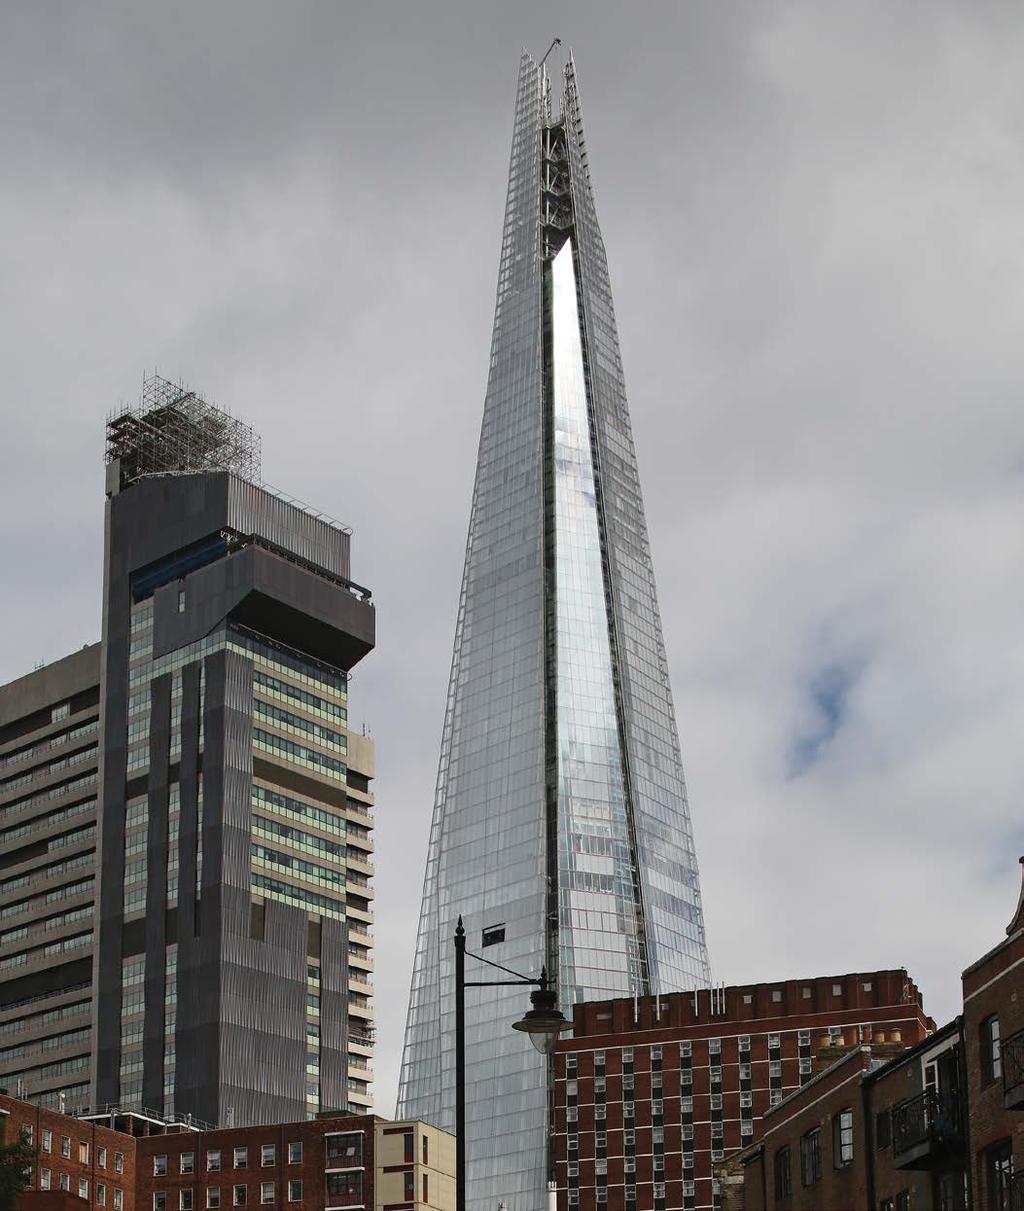 to reflect the innovative nature of The Shard, whilst leaving a lasting impression on the